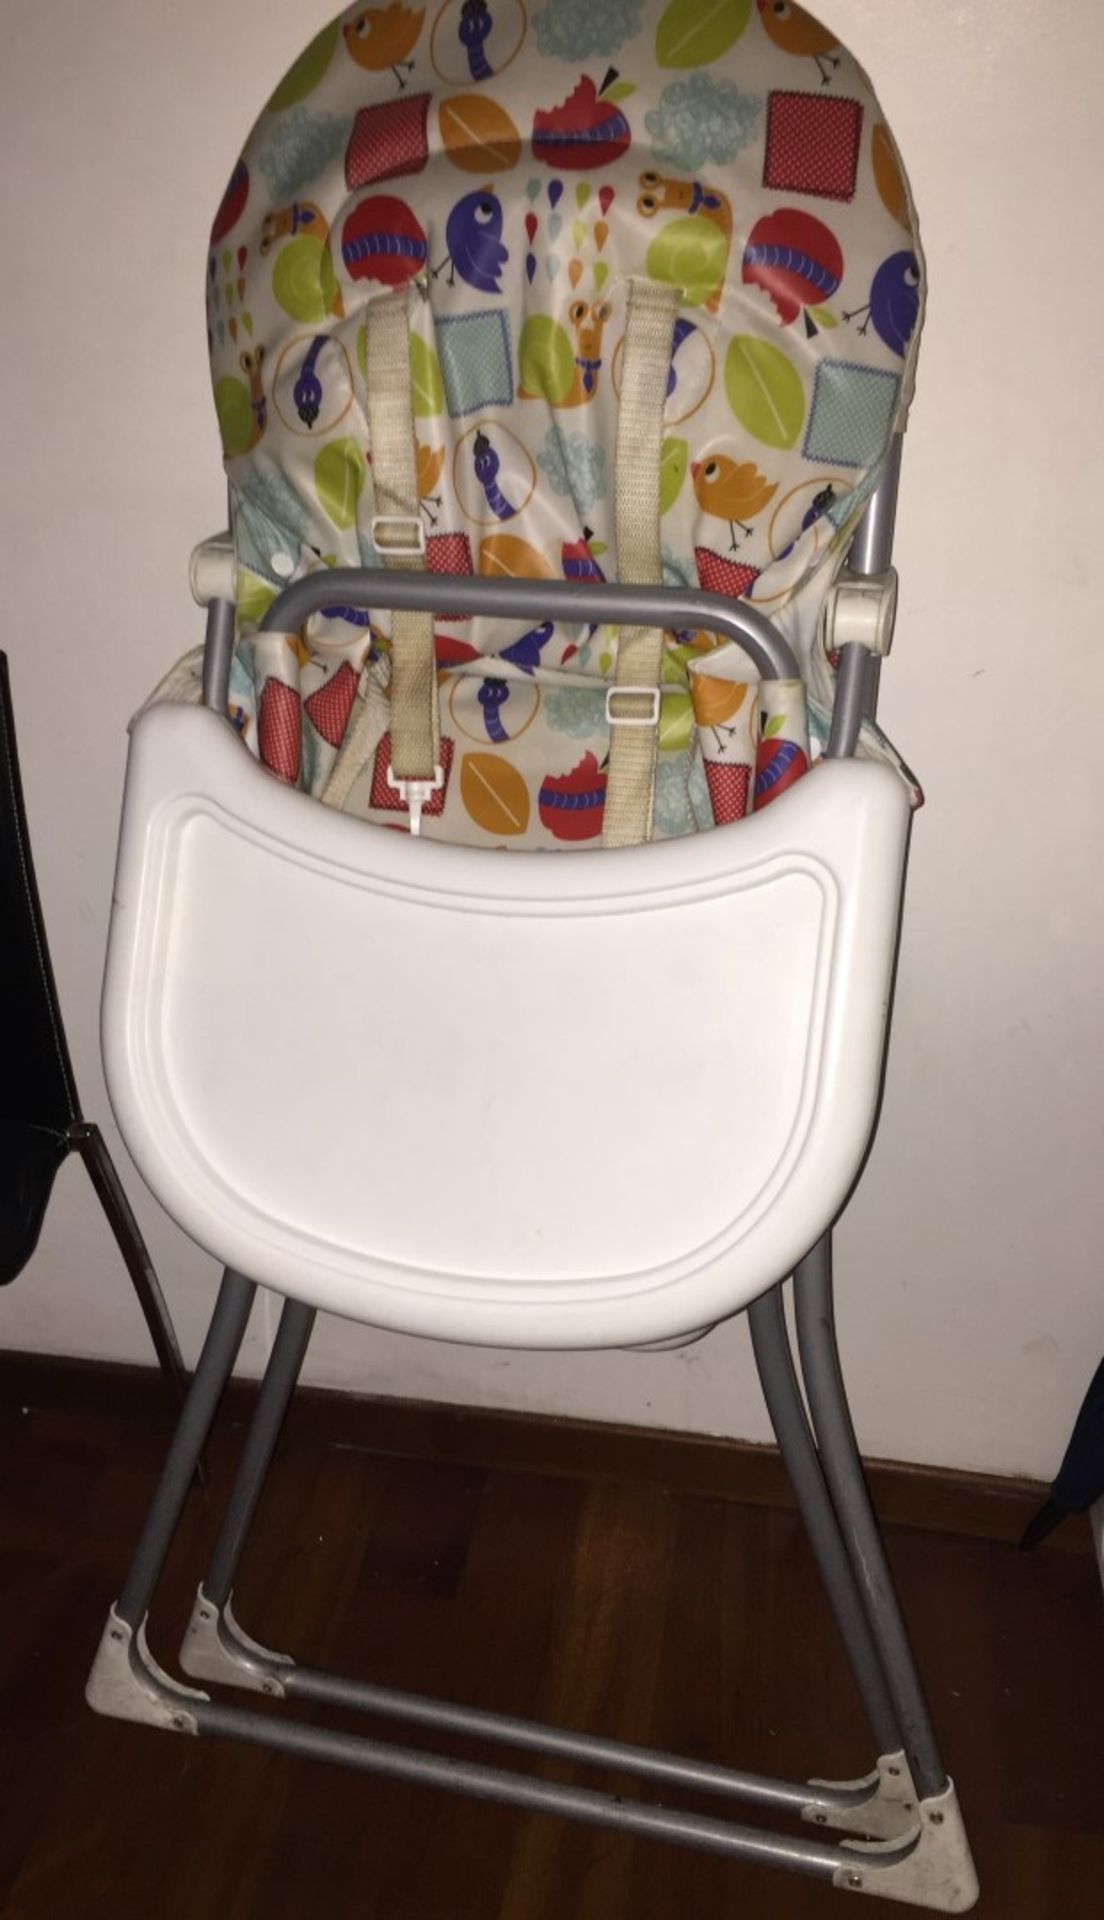 2 x Childrens High Chairs - Foldable High Chairs With Eating Trays - CL188 - Ref GF7 - Location: - Image 3 of 3